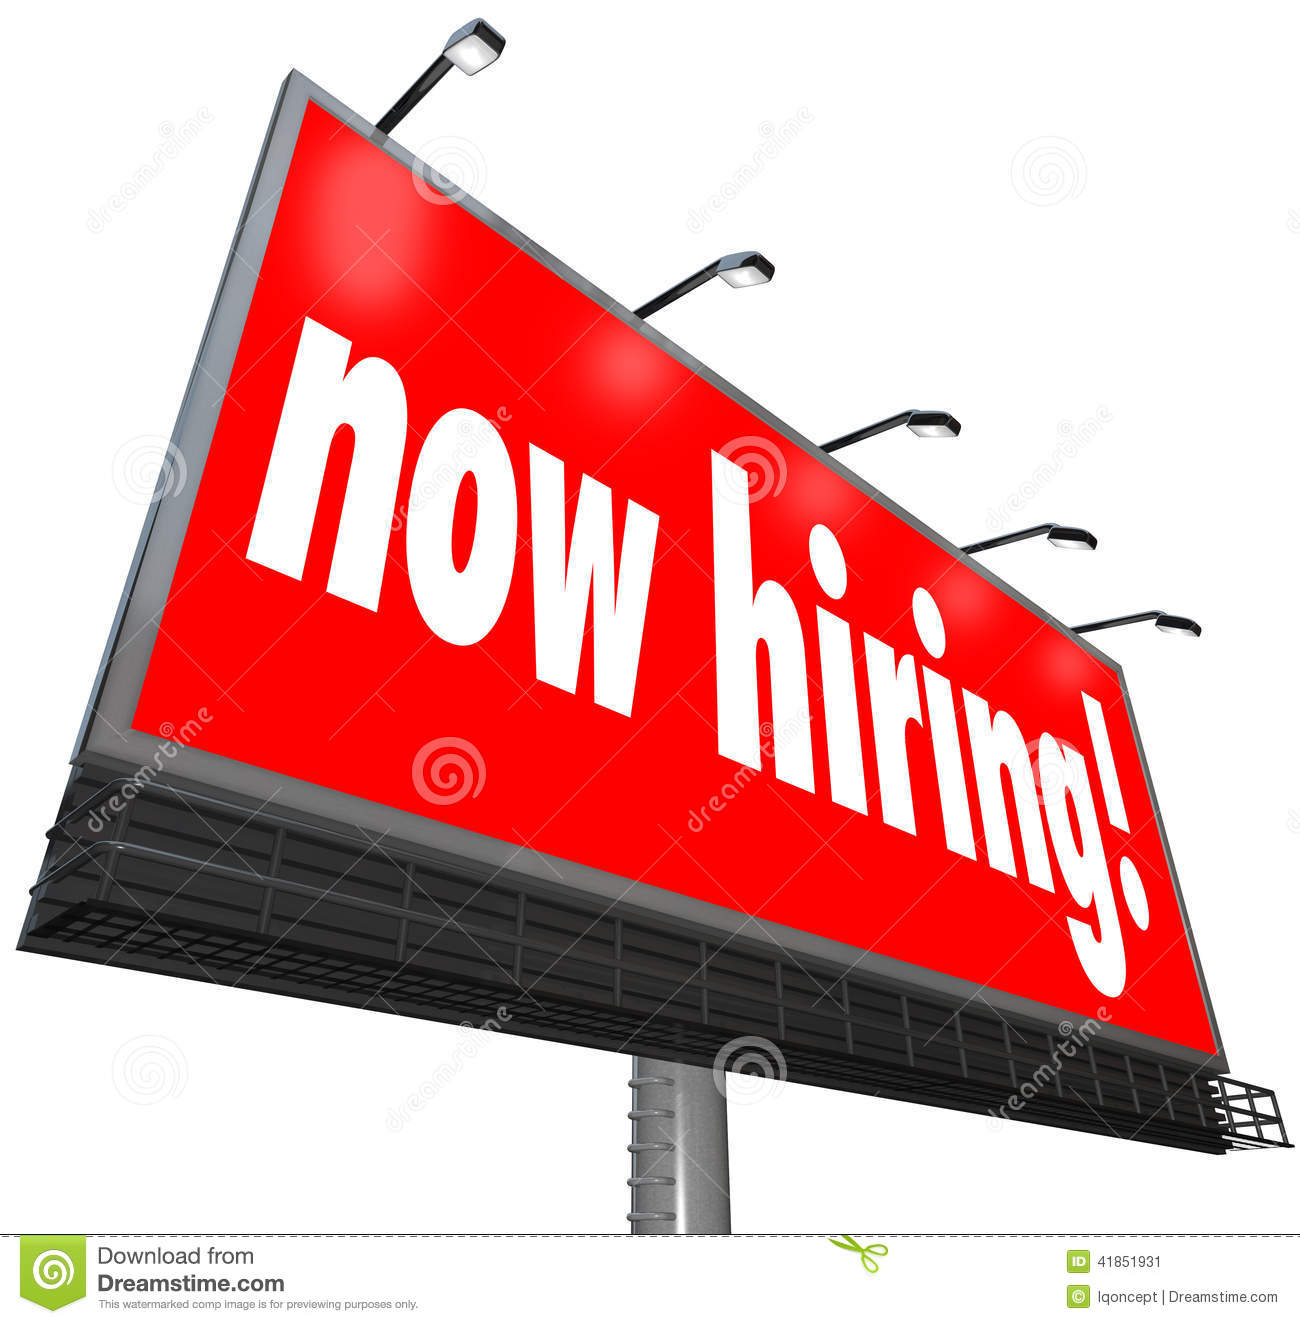 Now Hiring Words On A Big Red Outdoor Billboard Sign Or Banner To